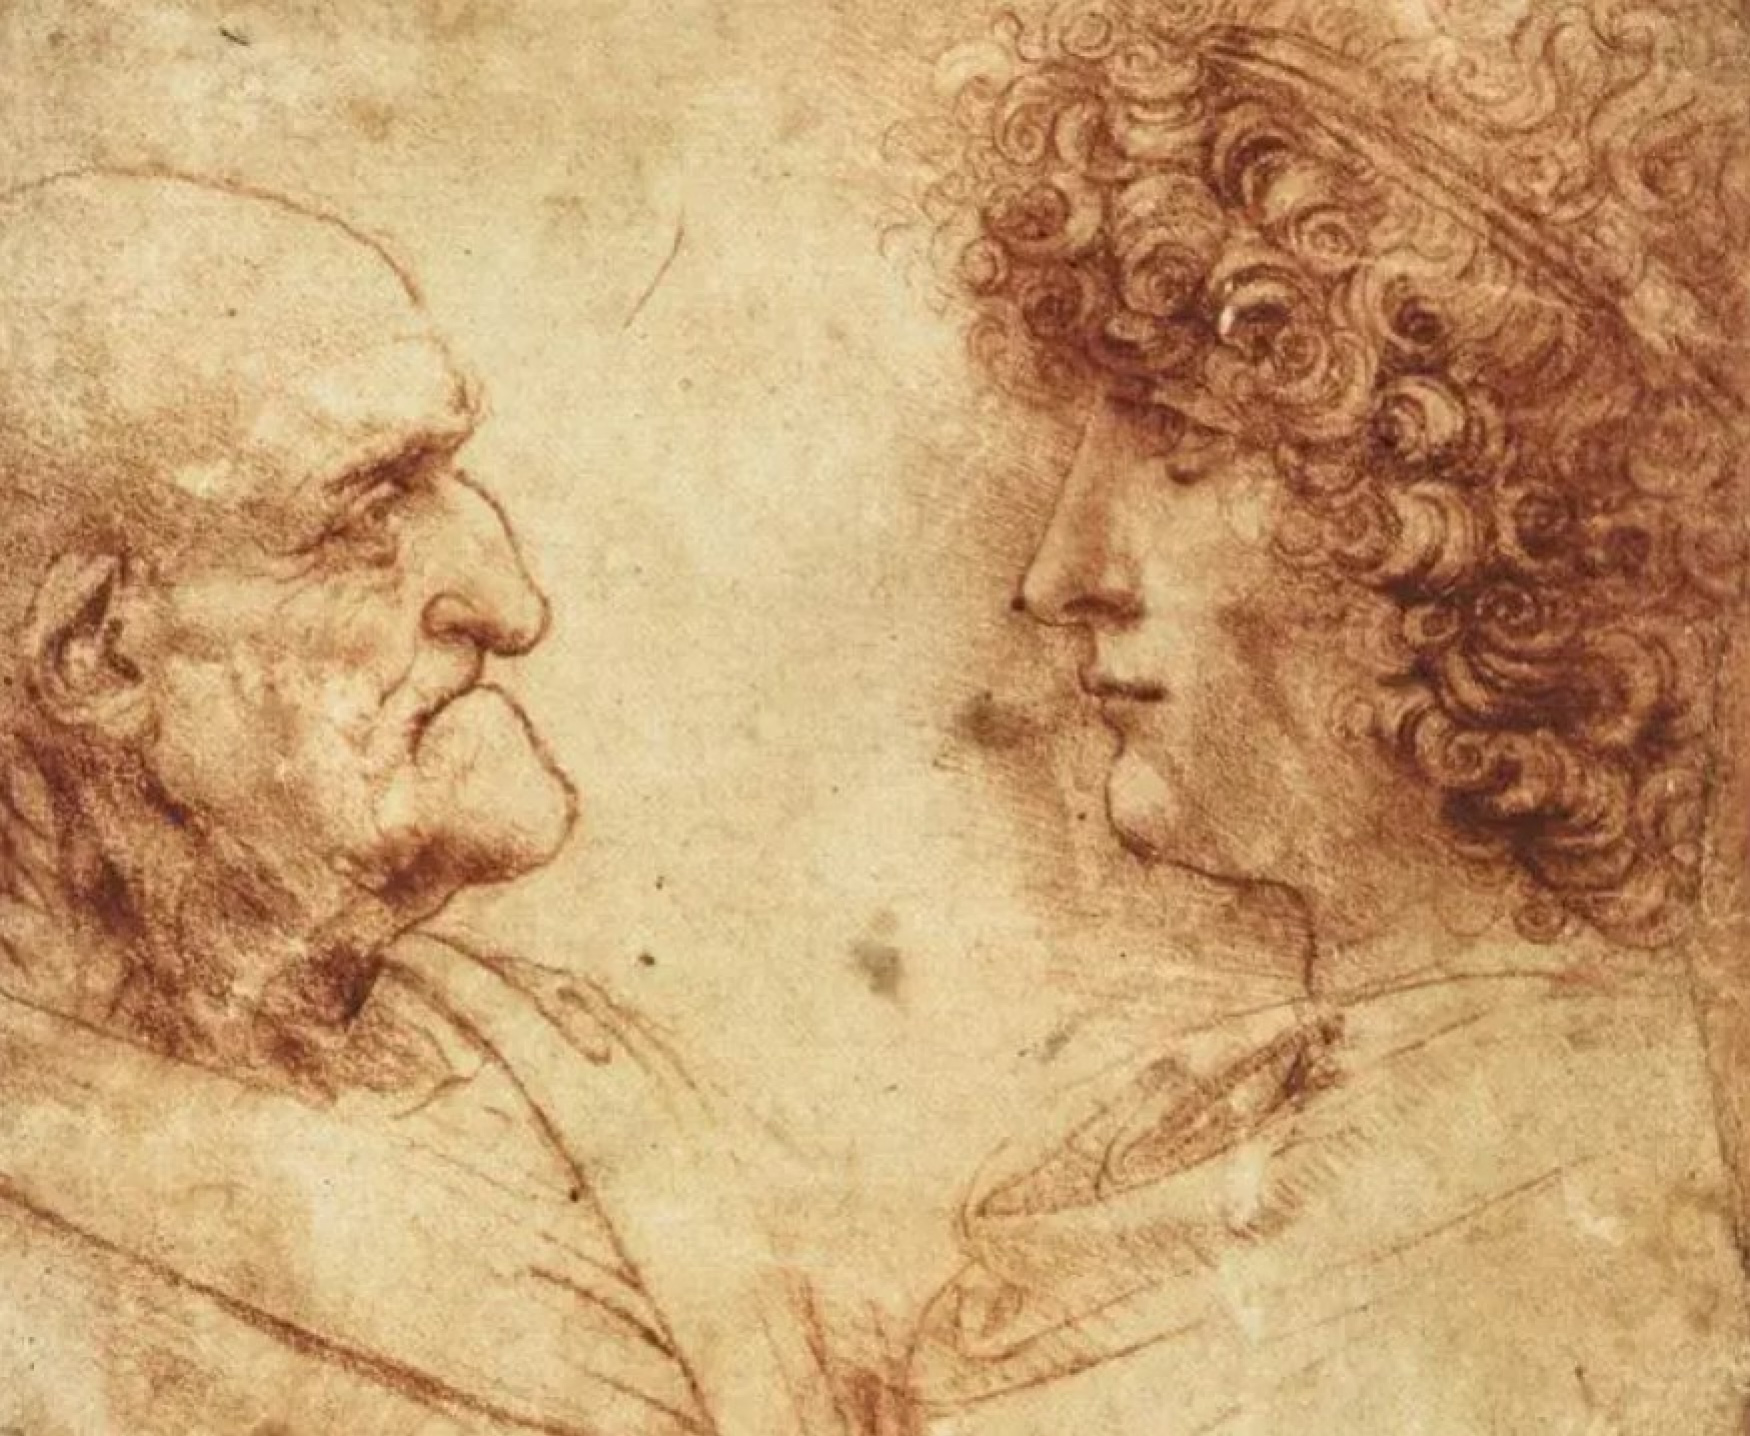 Leonardo Da Vinci  A Life In Drawing review A view into the restless mind  of the ultimate Renaissance man  London Evening Standard  Evening Standard